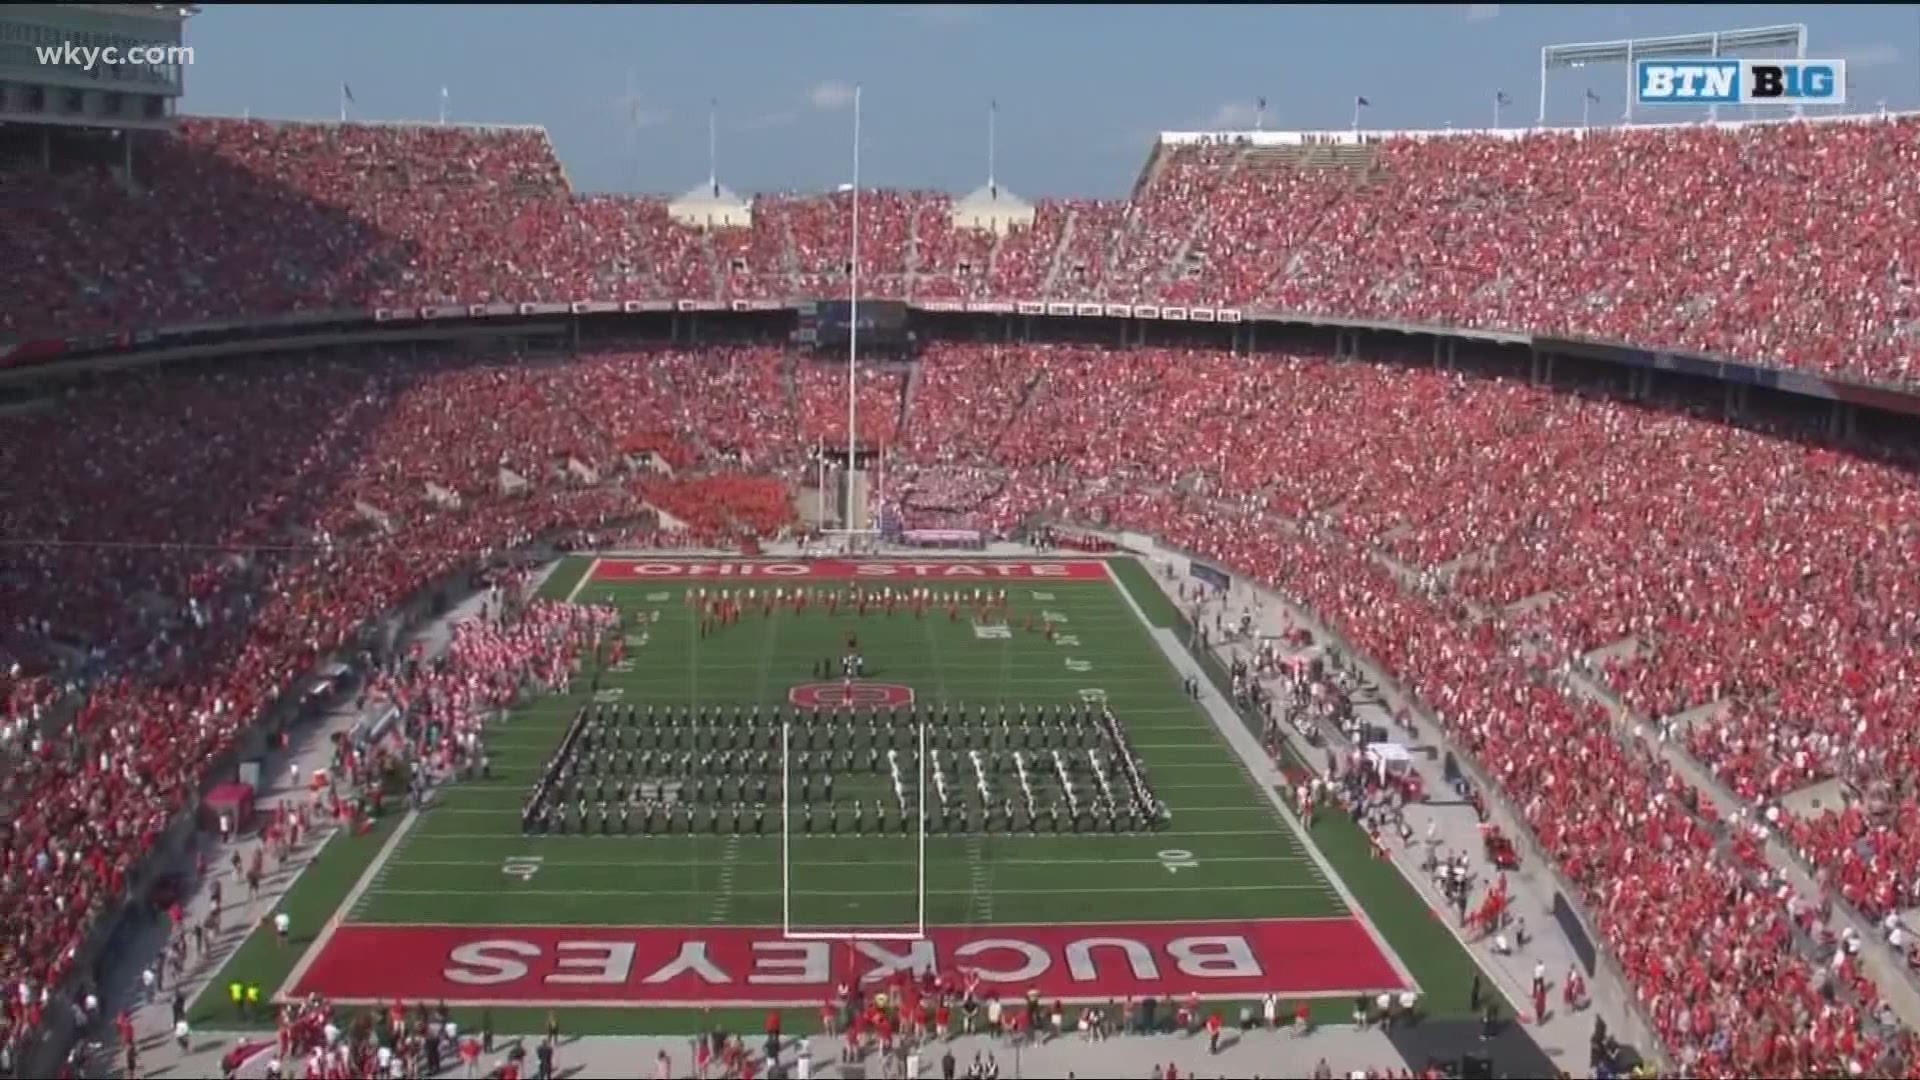 The Ohio State University released reports and public records on Thursday regarding the investigation into the allegations.